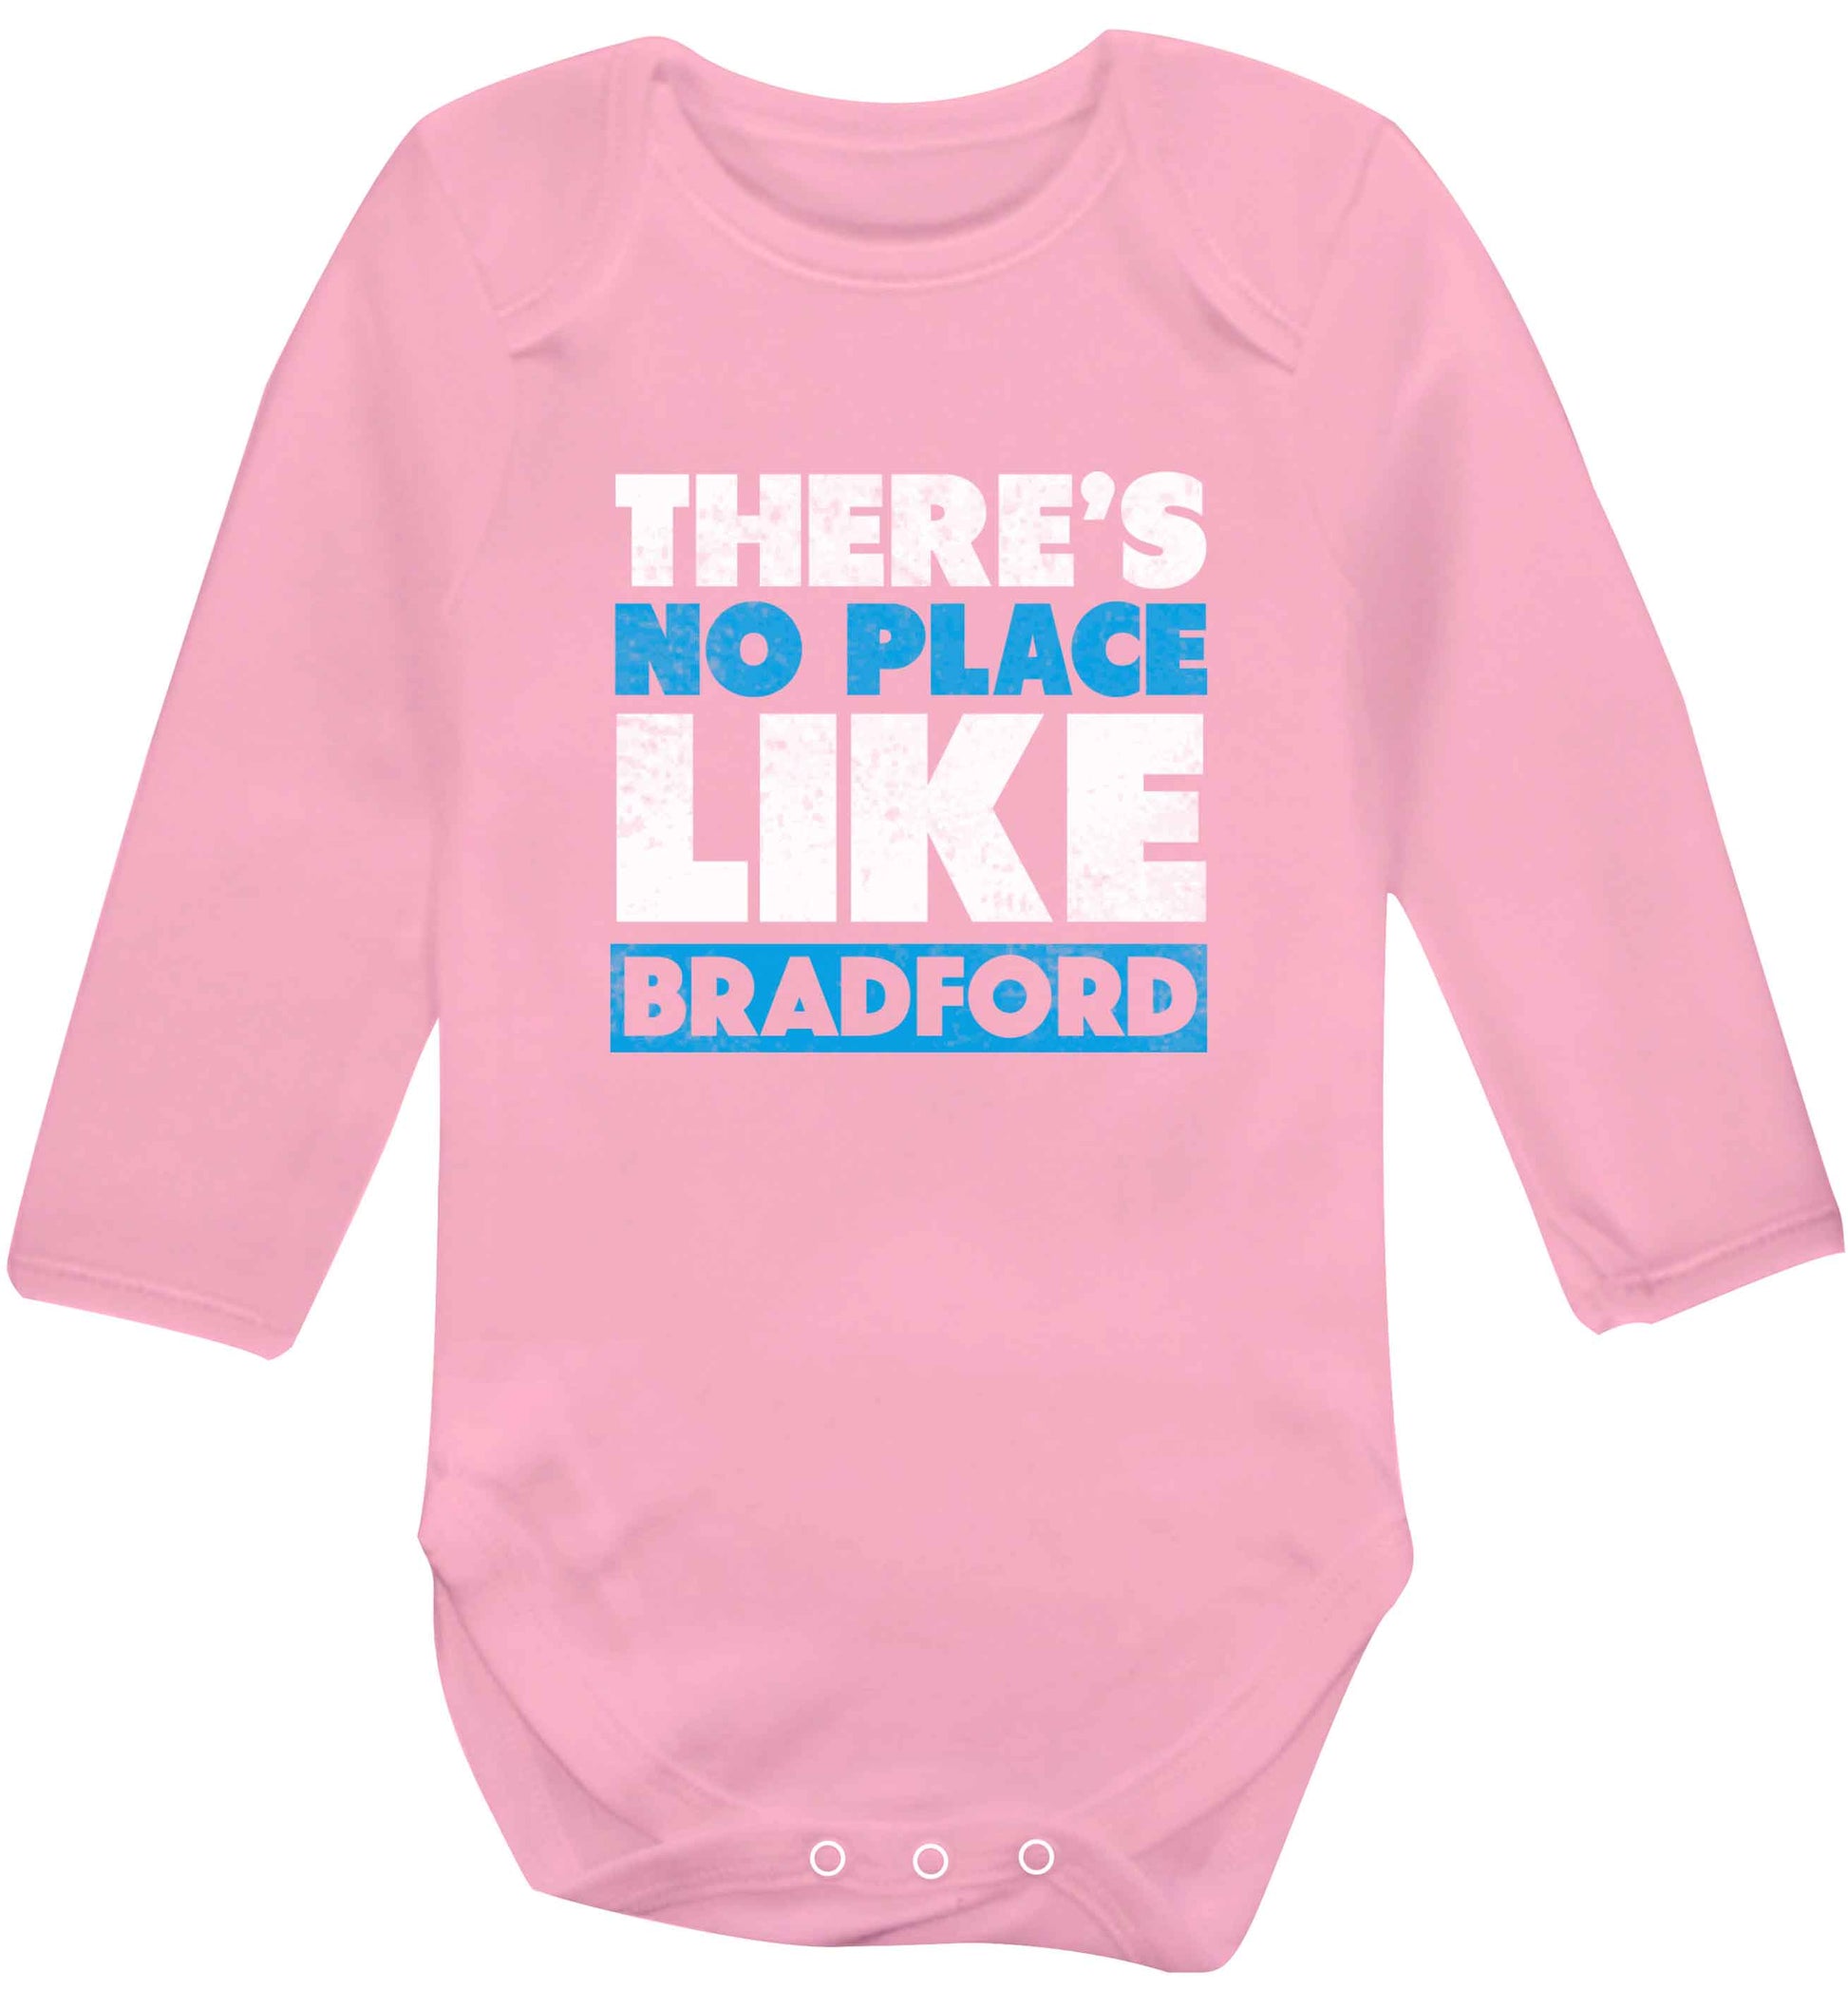 There's no place like Bradford baby vest long sleeved pale pink 6-12 months